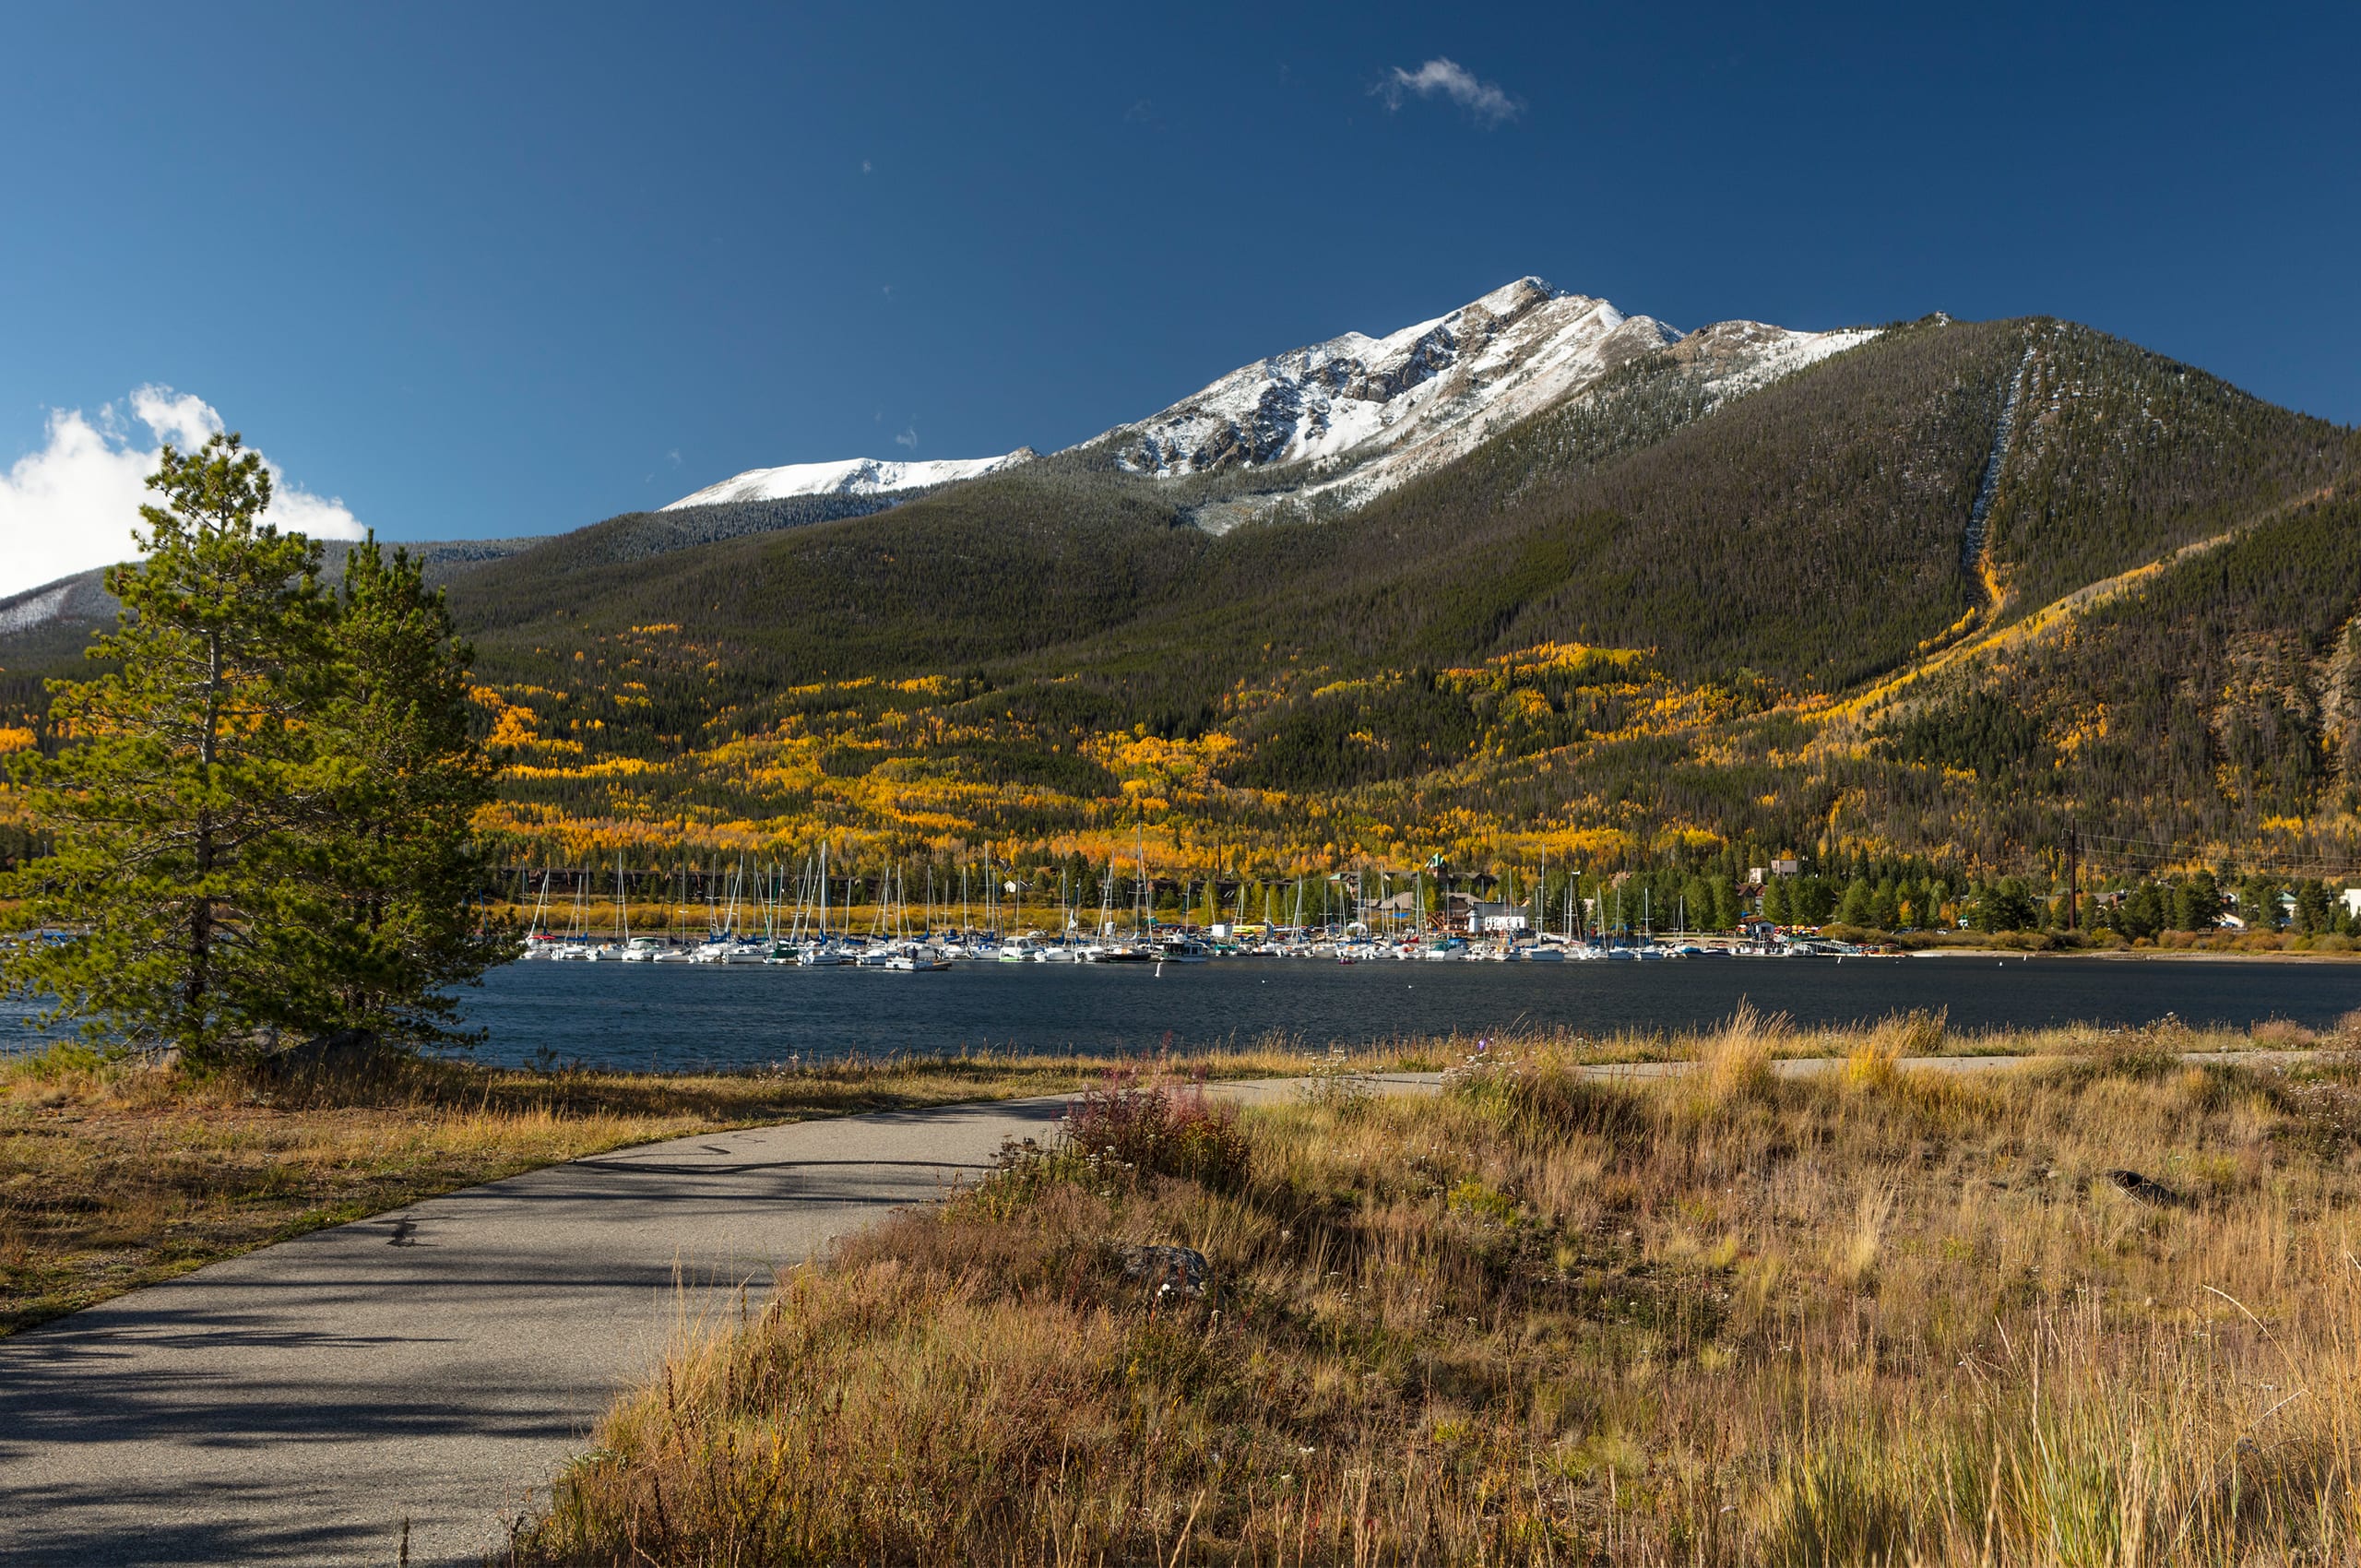 Recreation path in Frisco with Dillon Reservoir and Ten Mile Range with snow